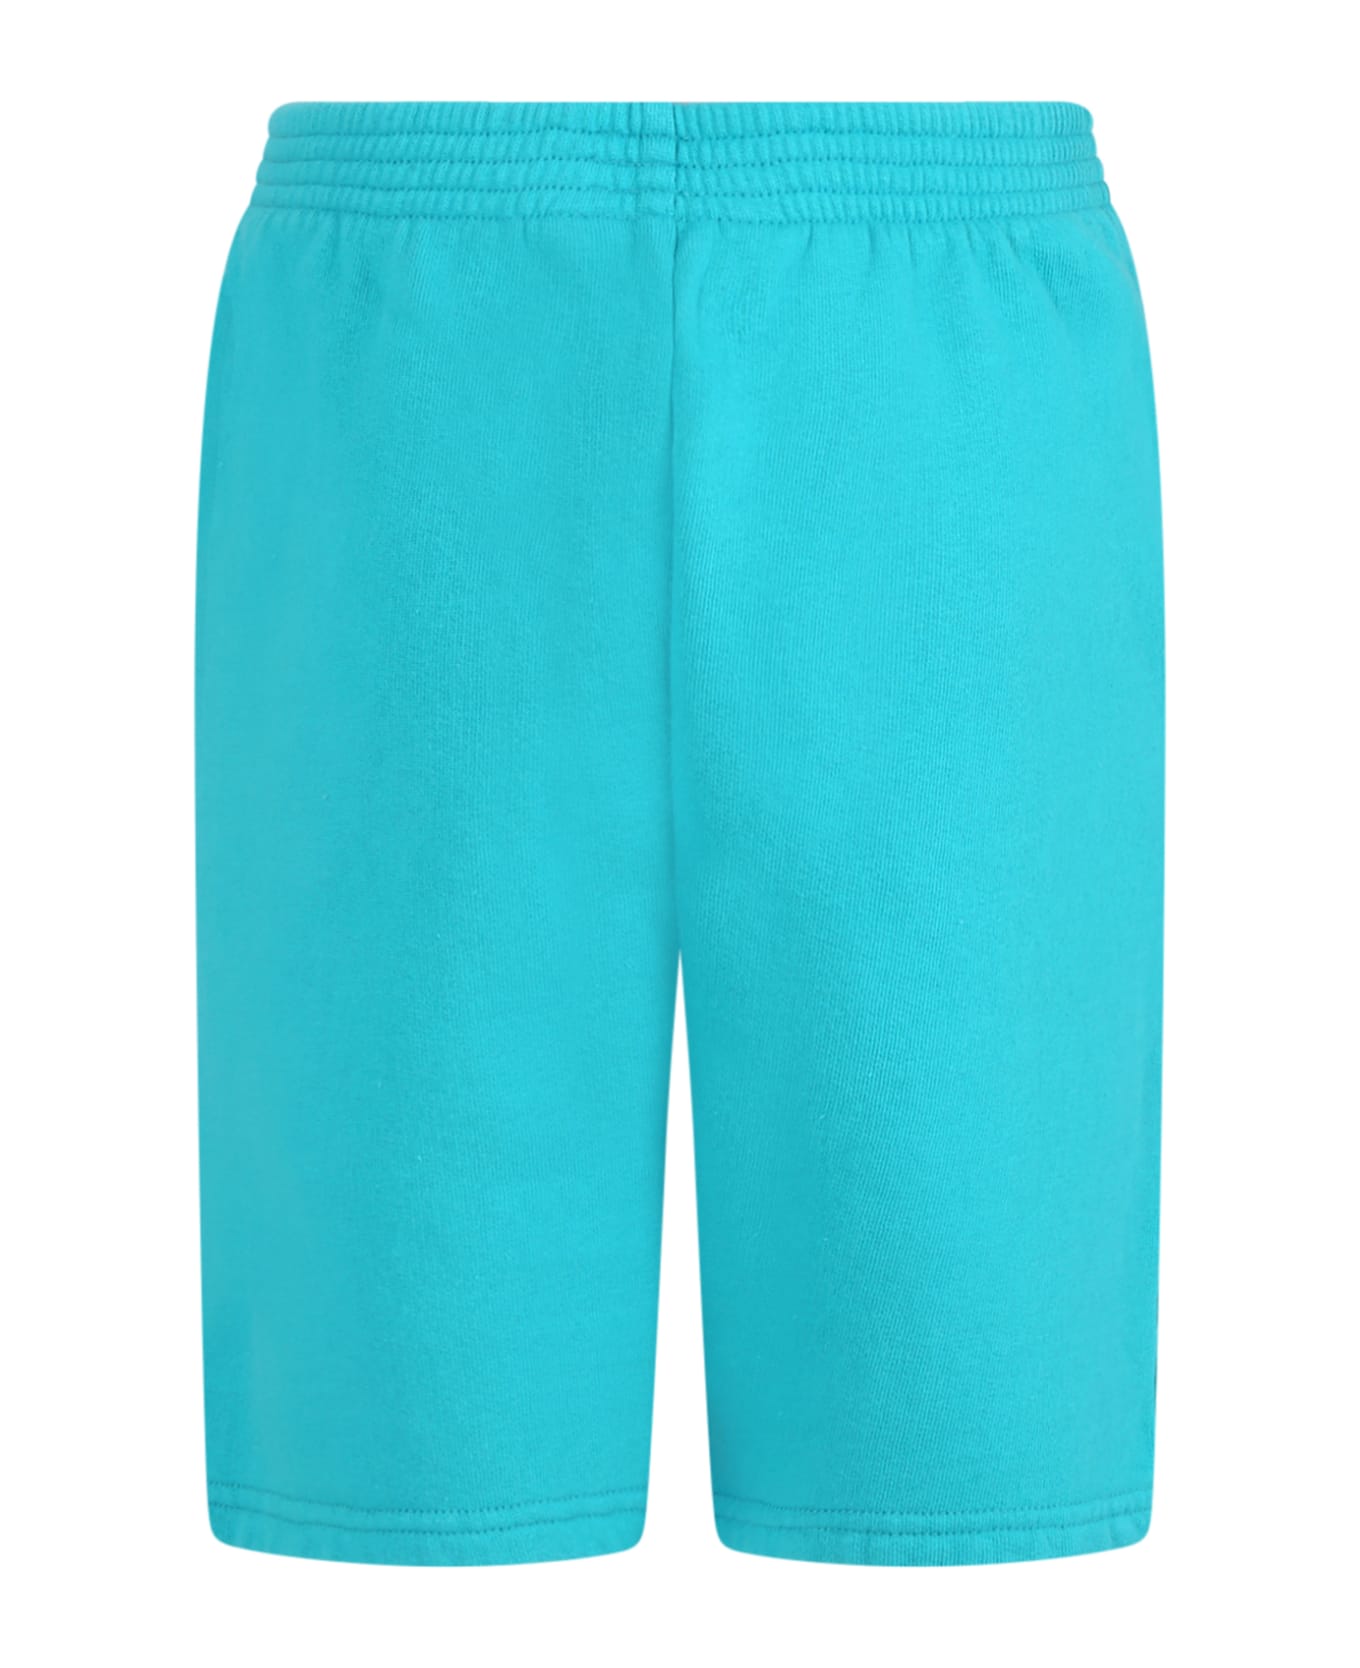 Balenciaga Turquoise Short For Kids With Logo - Light Blue